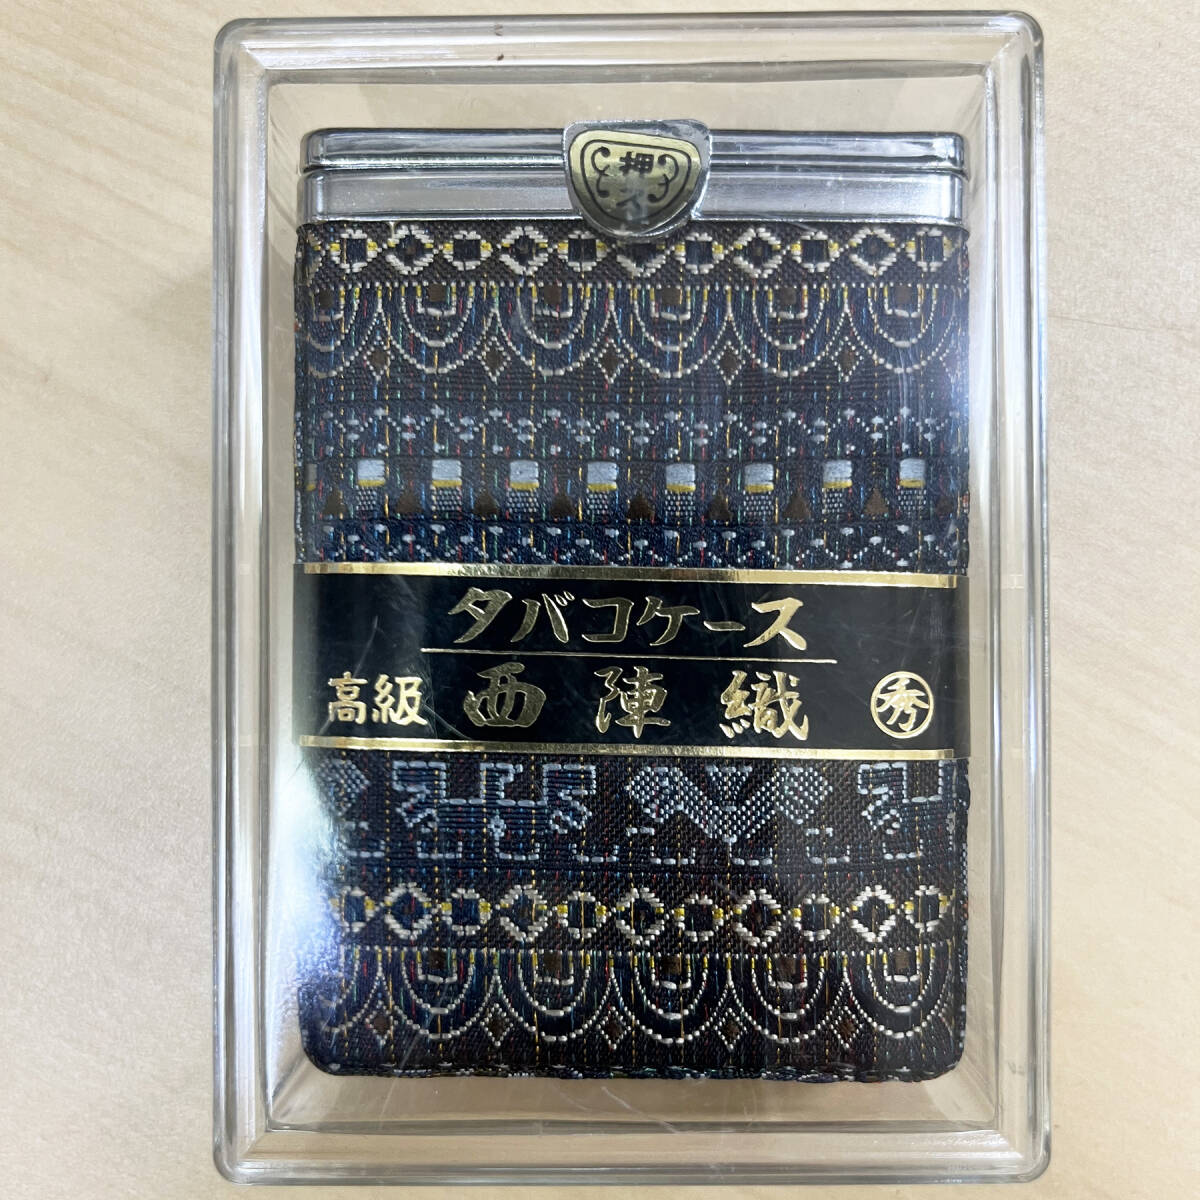 [ unused long-term keeping goods ] high class west . woven box type cigarette case pushed s cigarettes case Showa Retro smoke . inserting plastic in the case 